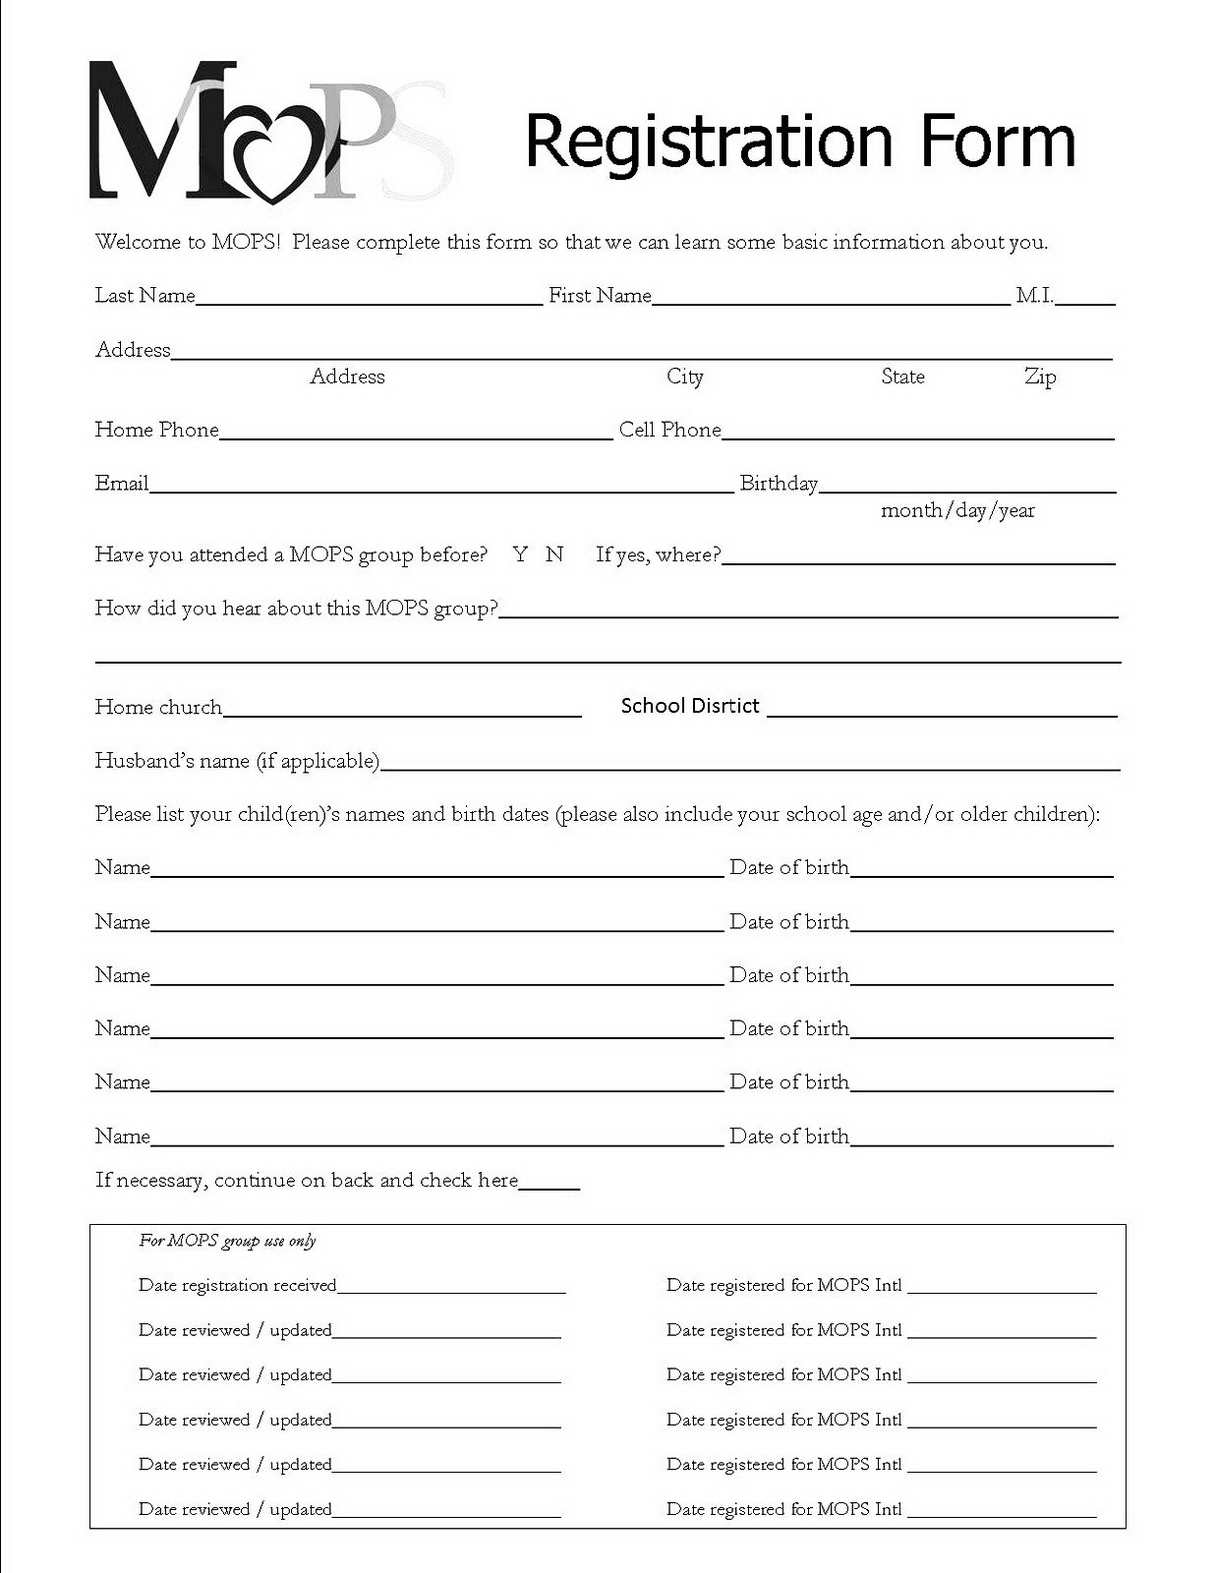 registration form templates free download   April.onthemarch.co